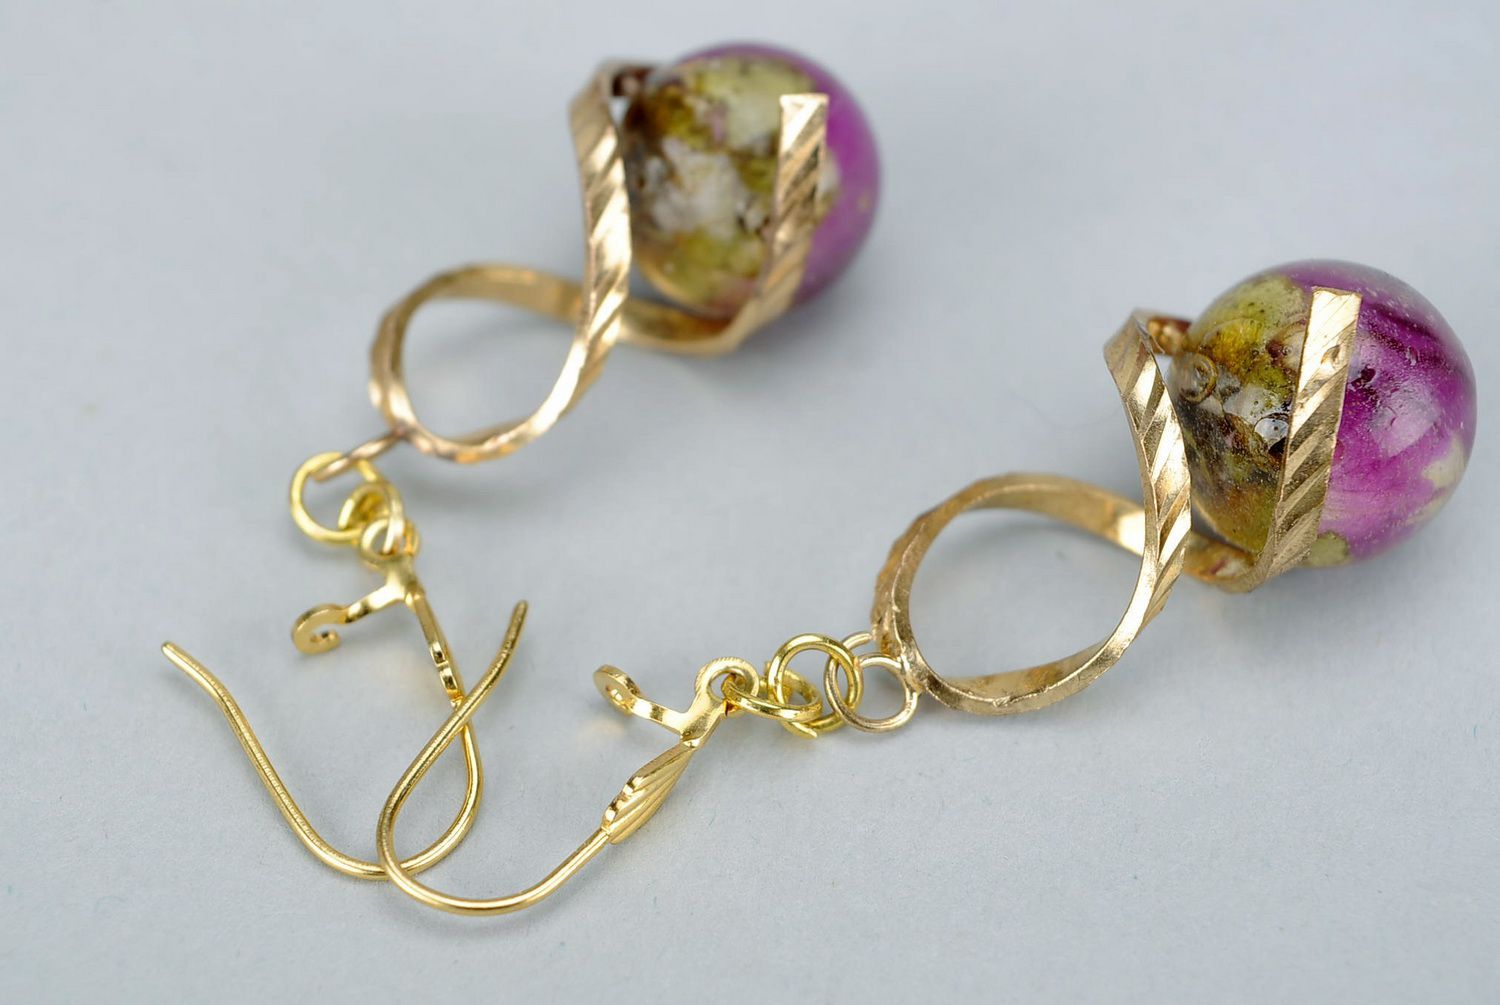 Golden earrings made from rose buds photo 4